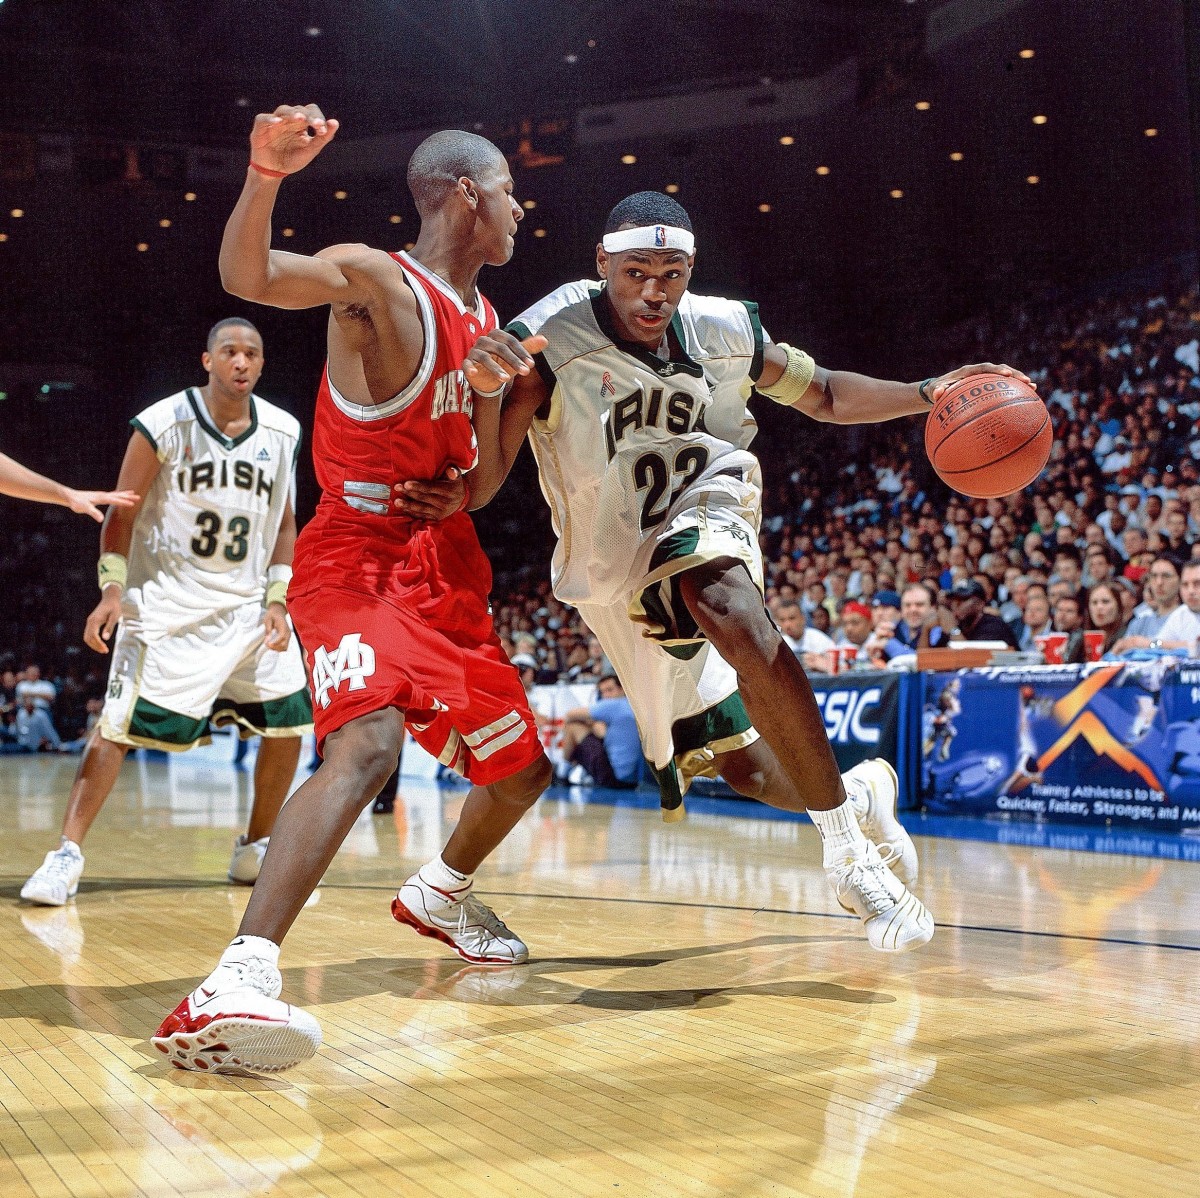 Long before his kids were doing the prep showcase thing, LeBron took St. V’s to L.A. and offed Mater Dei Prep on national TV.